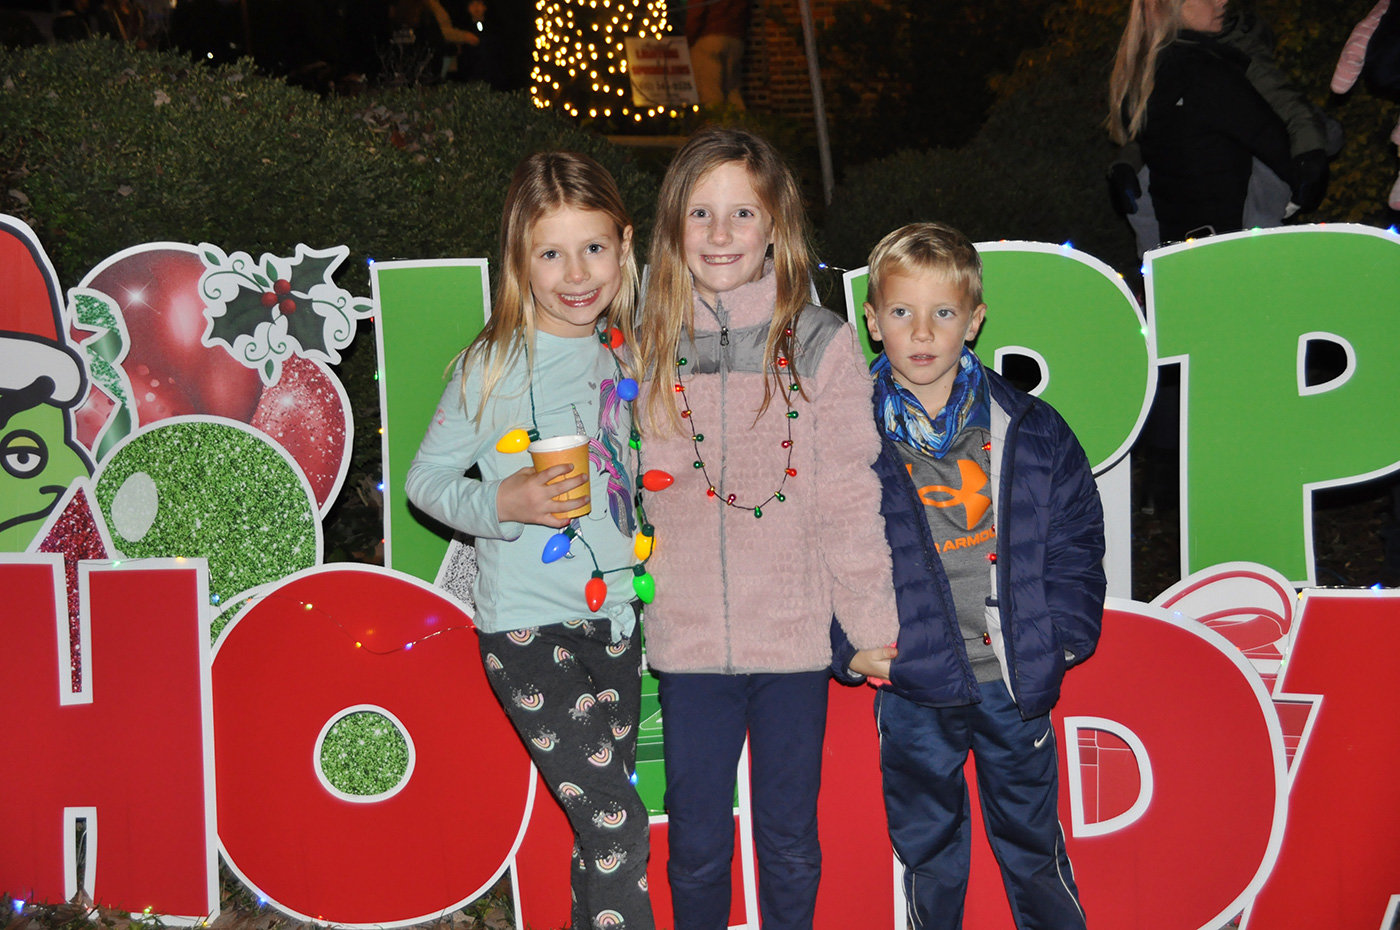 Willa Higgs, Charlotte Wallace and Cooper Wallace enjoyed the tree-lighting festivities.